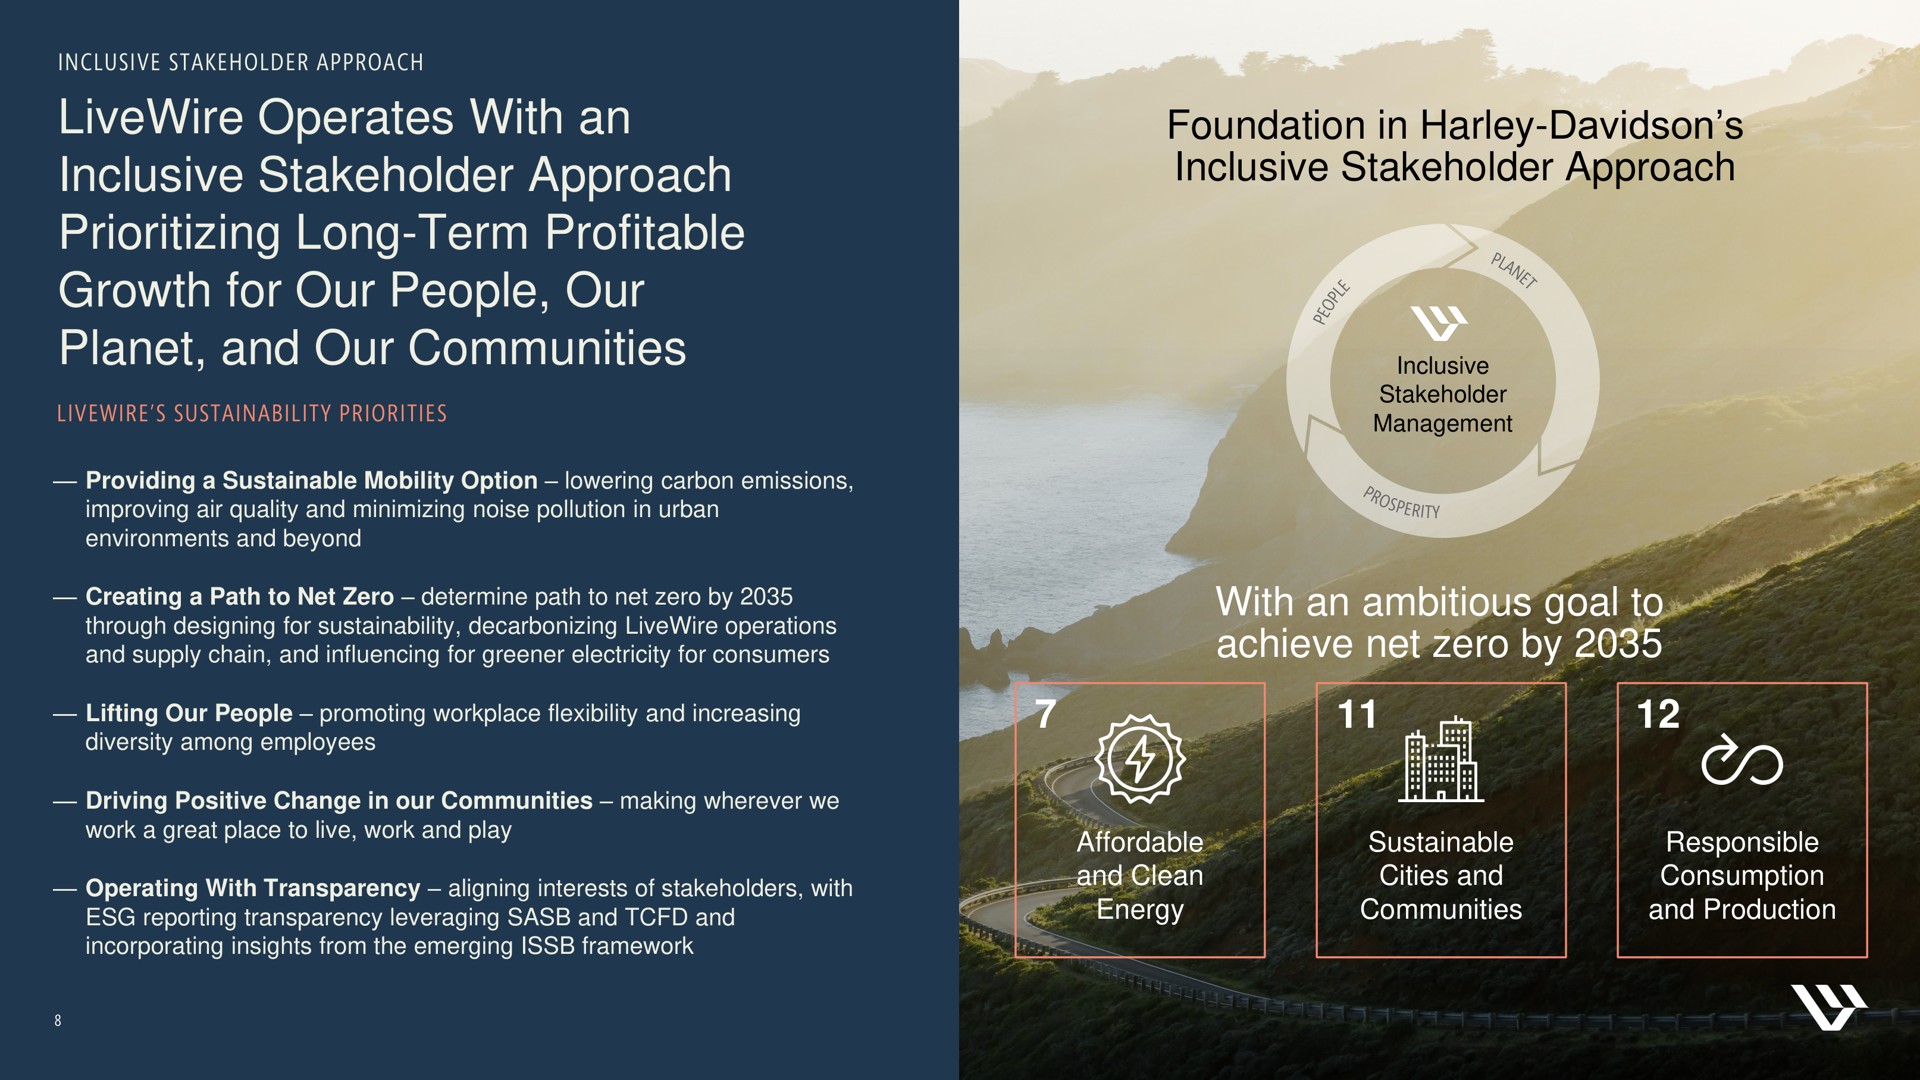 operates with an inclusive stakeholder approach long term profitable growth for our people our planet and our communities foundation in inclusive stakeholder approach with an ambitious goal to achieve net zero by | Harley Davidson